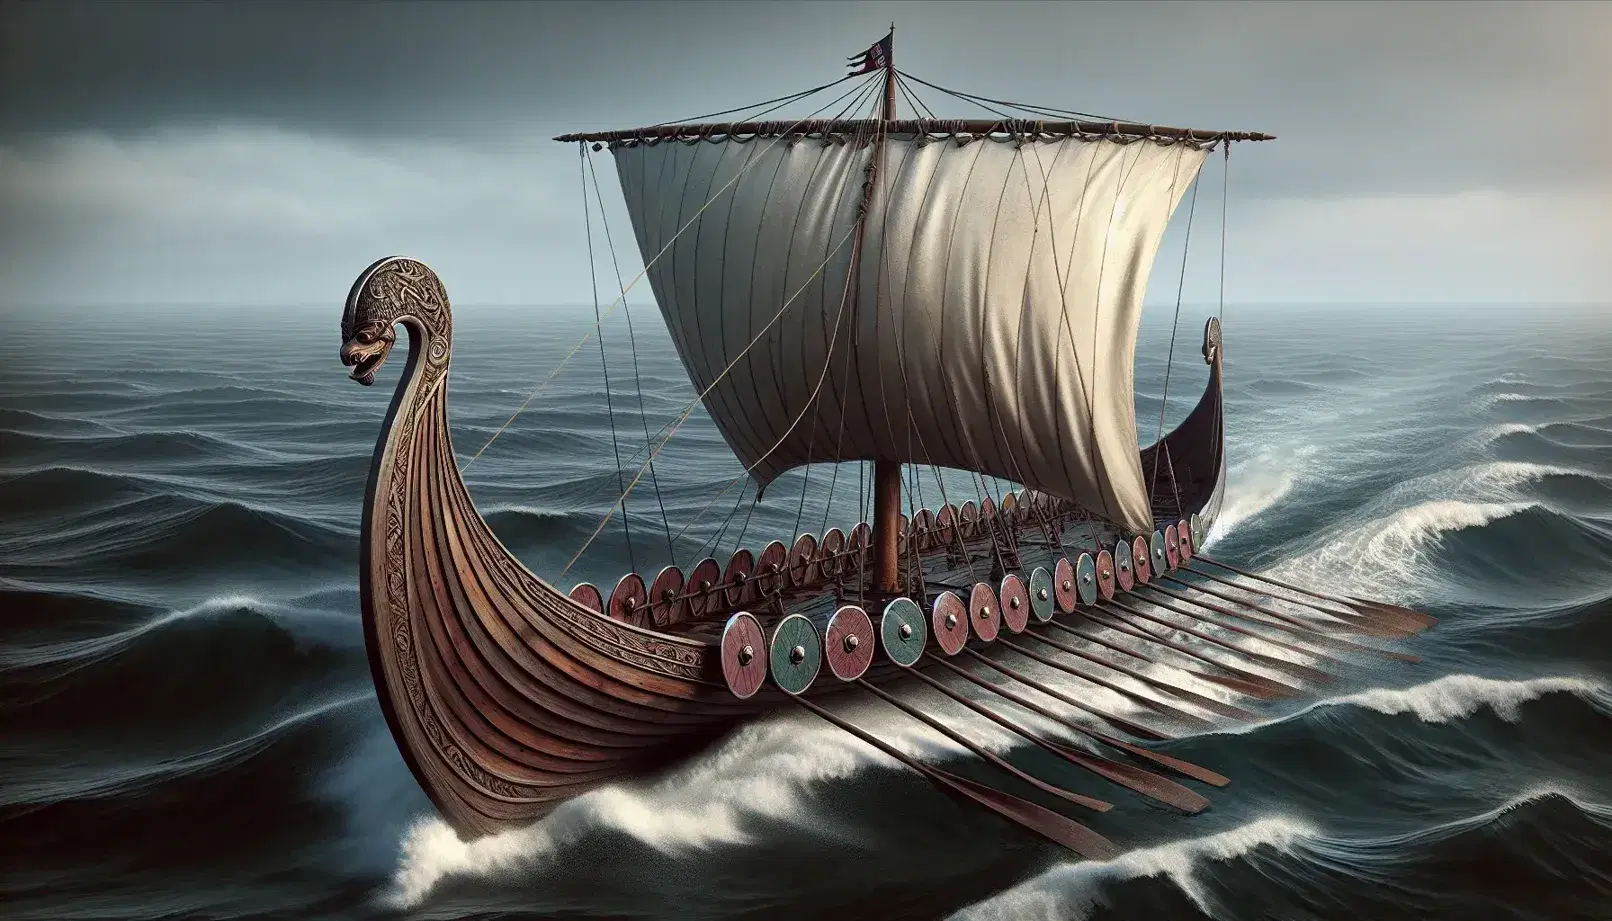 Traditional Viking longship at sea with ornate dragon heads, aligned round shields, and a billowing white sail against an overcast sky and rocky coastline.